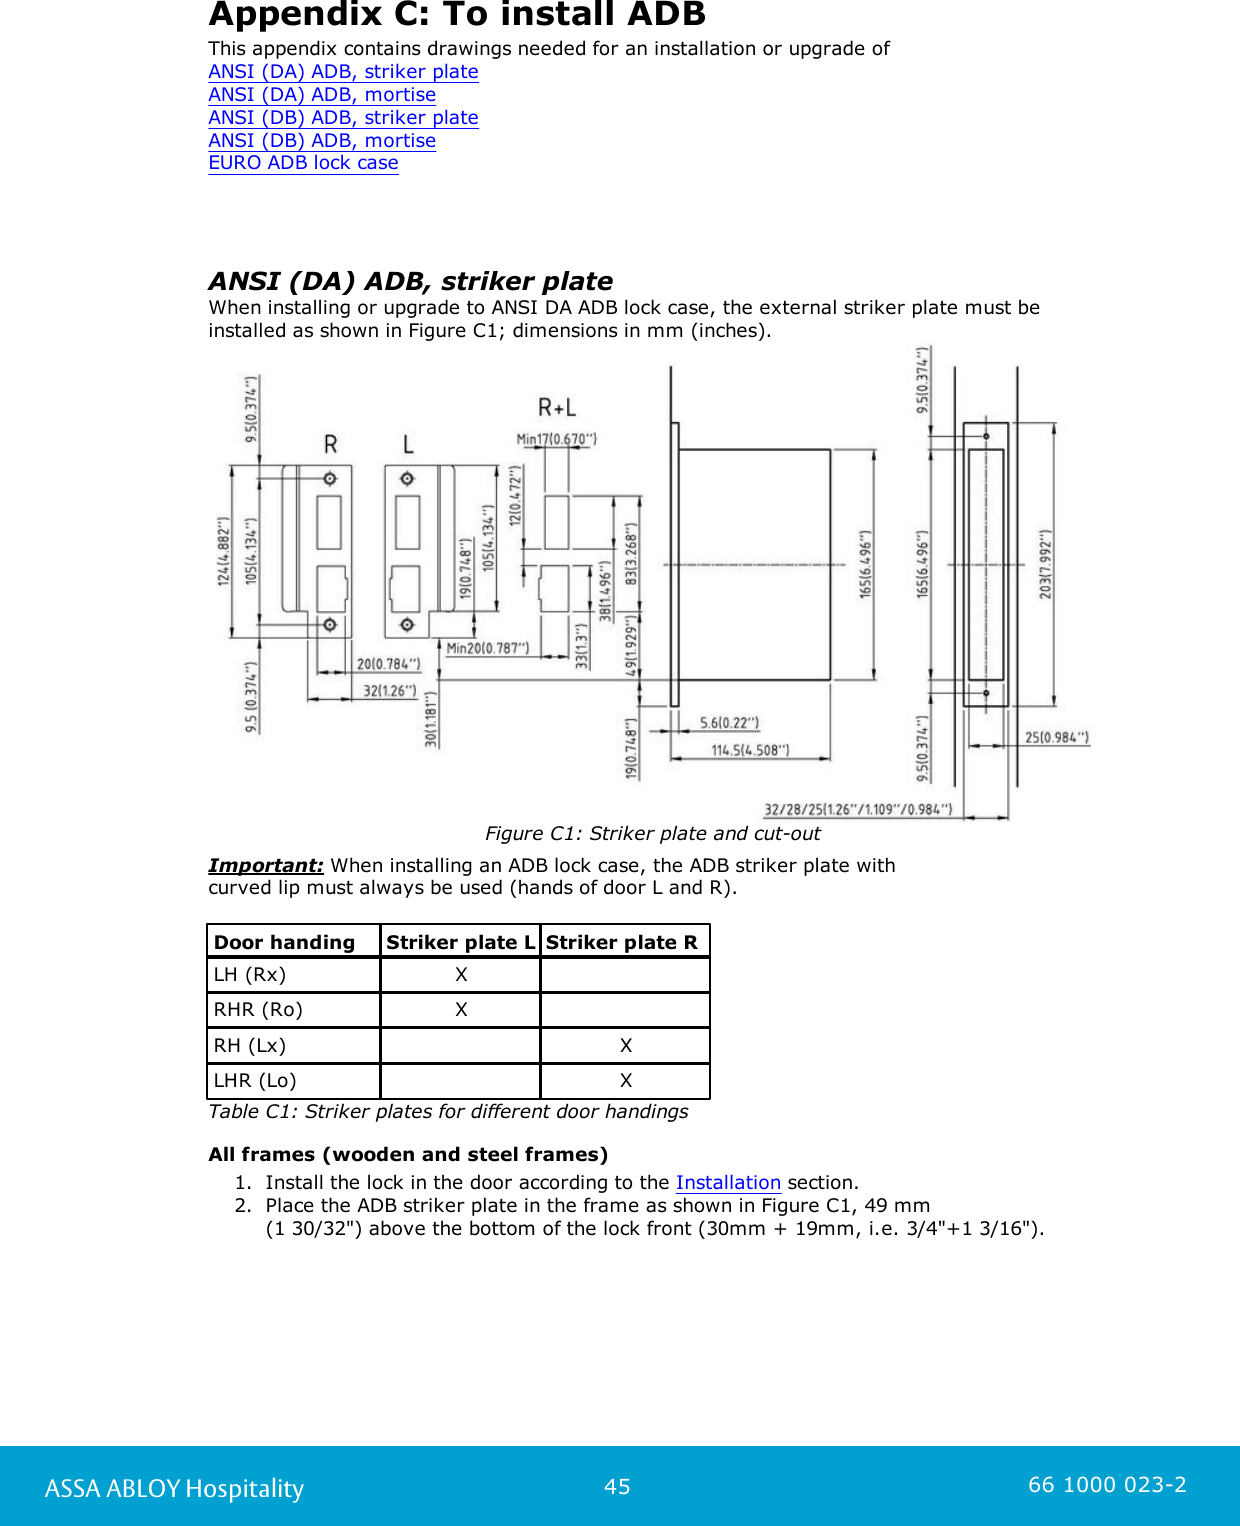 45ASSA ABLOY Hospitality 66 1000 023-2Appendix C: To install ADB This appendix contains drawings needed for an installation or upgrade of ANSI (DA) ADB, striker plateANSI (DA) ADB, mortiseANSI (DB) ADB, striker plateANSI (DB) ADB, mortiseEURO ADB lock case ANSI (DA) ADB, striker plateWhen installing or upgrade to ANSI DA ADB lock case, the external striker plate must beinstalled as shown in Figure C1; dimensions in mm (inches). Figure C1: Striker plate and cut-out   Important: When installing an ADB lock case, the ADB striker plate with curved lip must always be used (hands of door L and R).Door handingStriker plate LStriker plate RLH (Rx)XRHR (Ro)XRH (Lx)XLHR (Lo)XTable C1: Striker plates for different door handings  All frames (wooden and steel frames)1. Install the lock in the door according to the Installation section.2. Place the ADB striker plate in the frame as shown in Figure C1, 49 mm (1 30/32&quot;) above the bottom of the lock front (30mm + 19mm, i.e. 3/4&quot;+1 3/16&quot;).